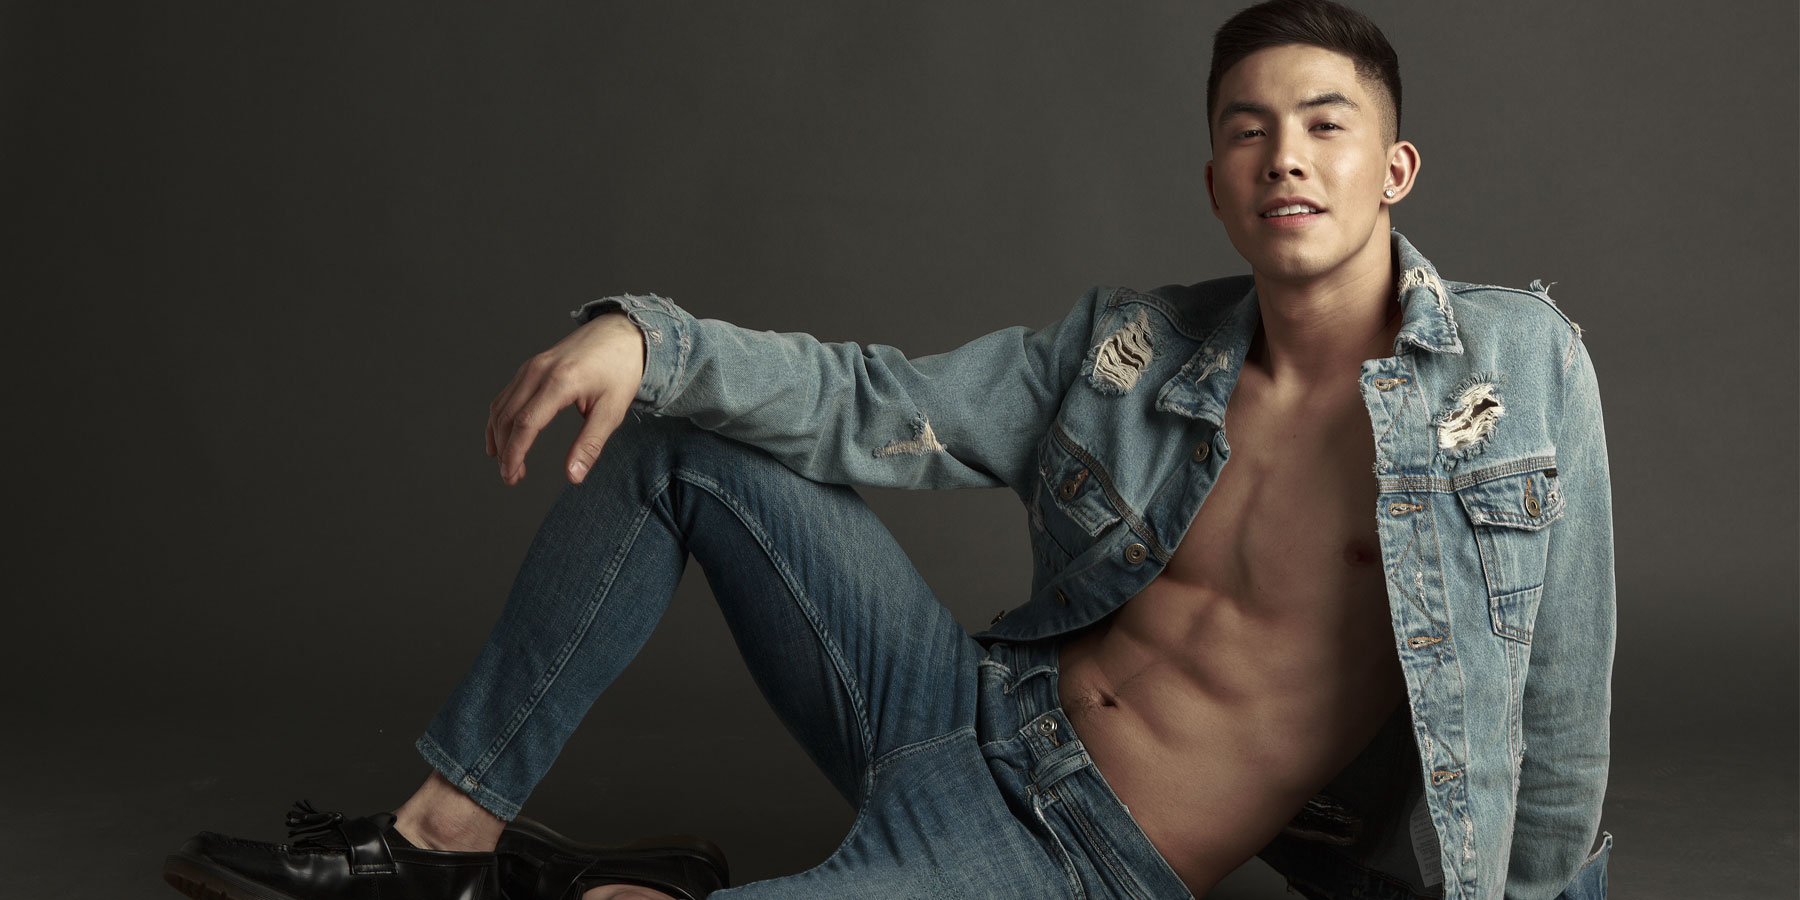 “I am awkward when it comes to photoshoots ha,” Tony Labrusca, a guy of 22